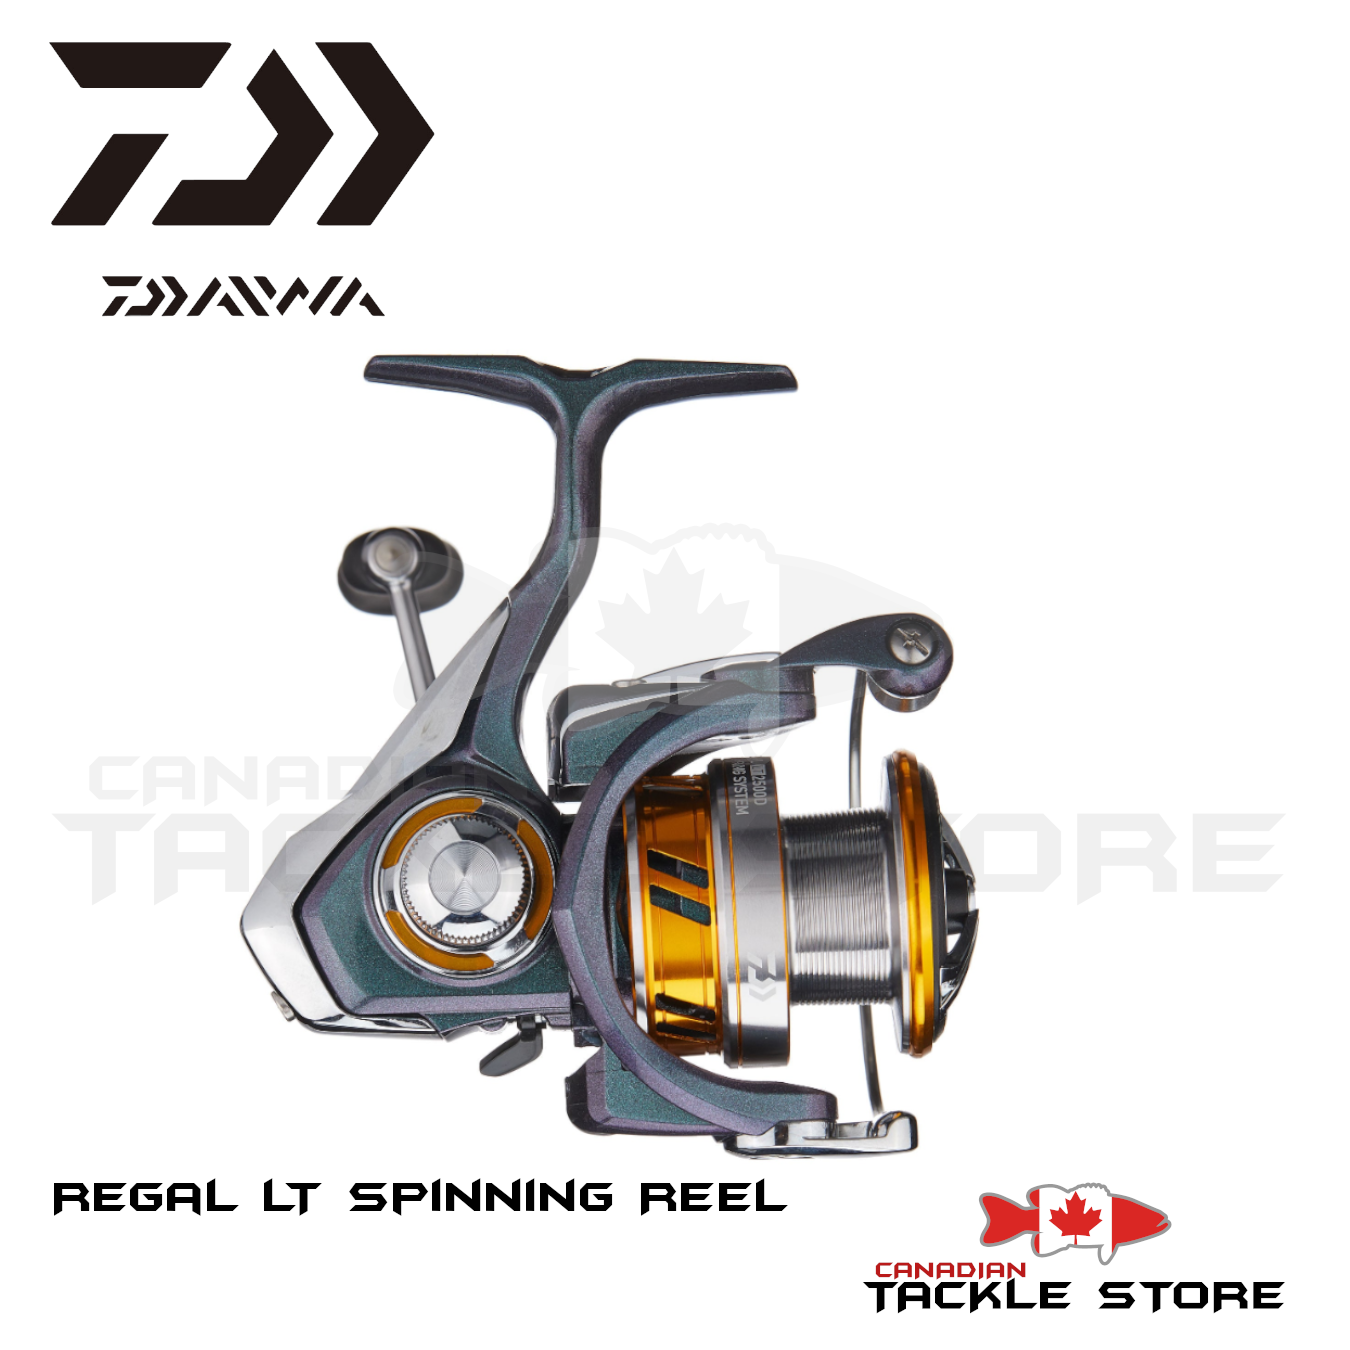 Daiwa Regal LT Spinning Reel – Canadian Tackle Store, 47% OFF